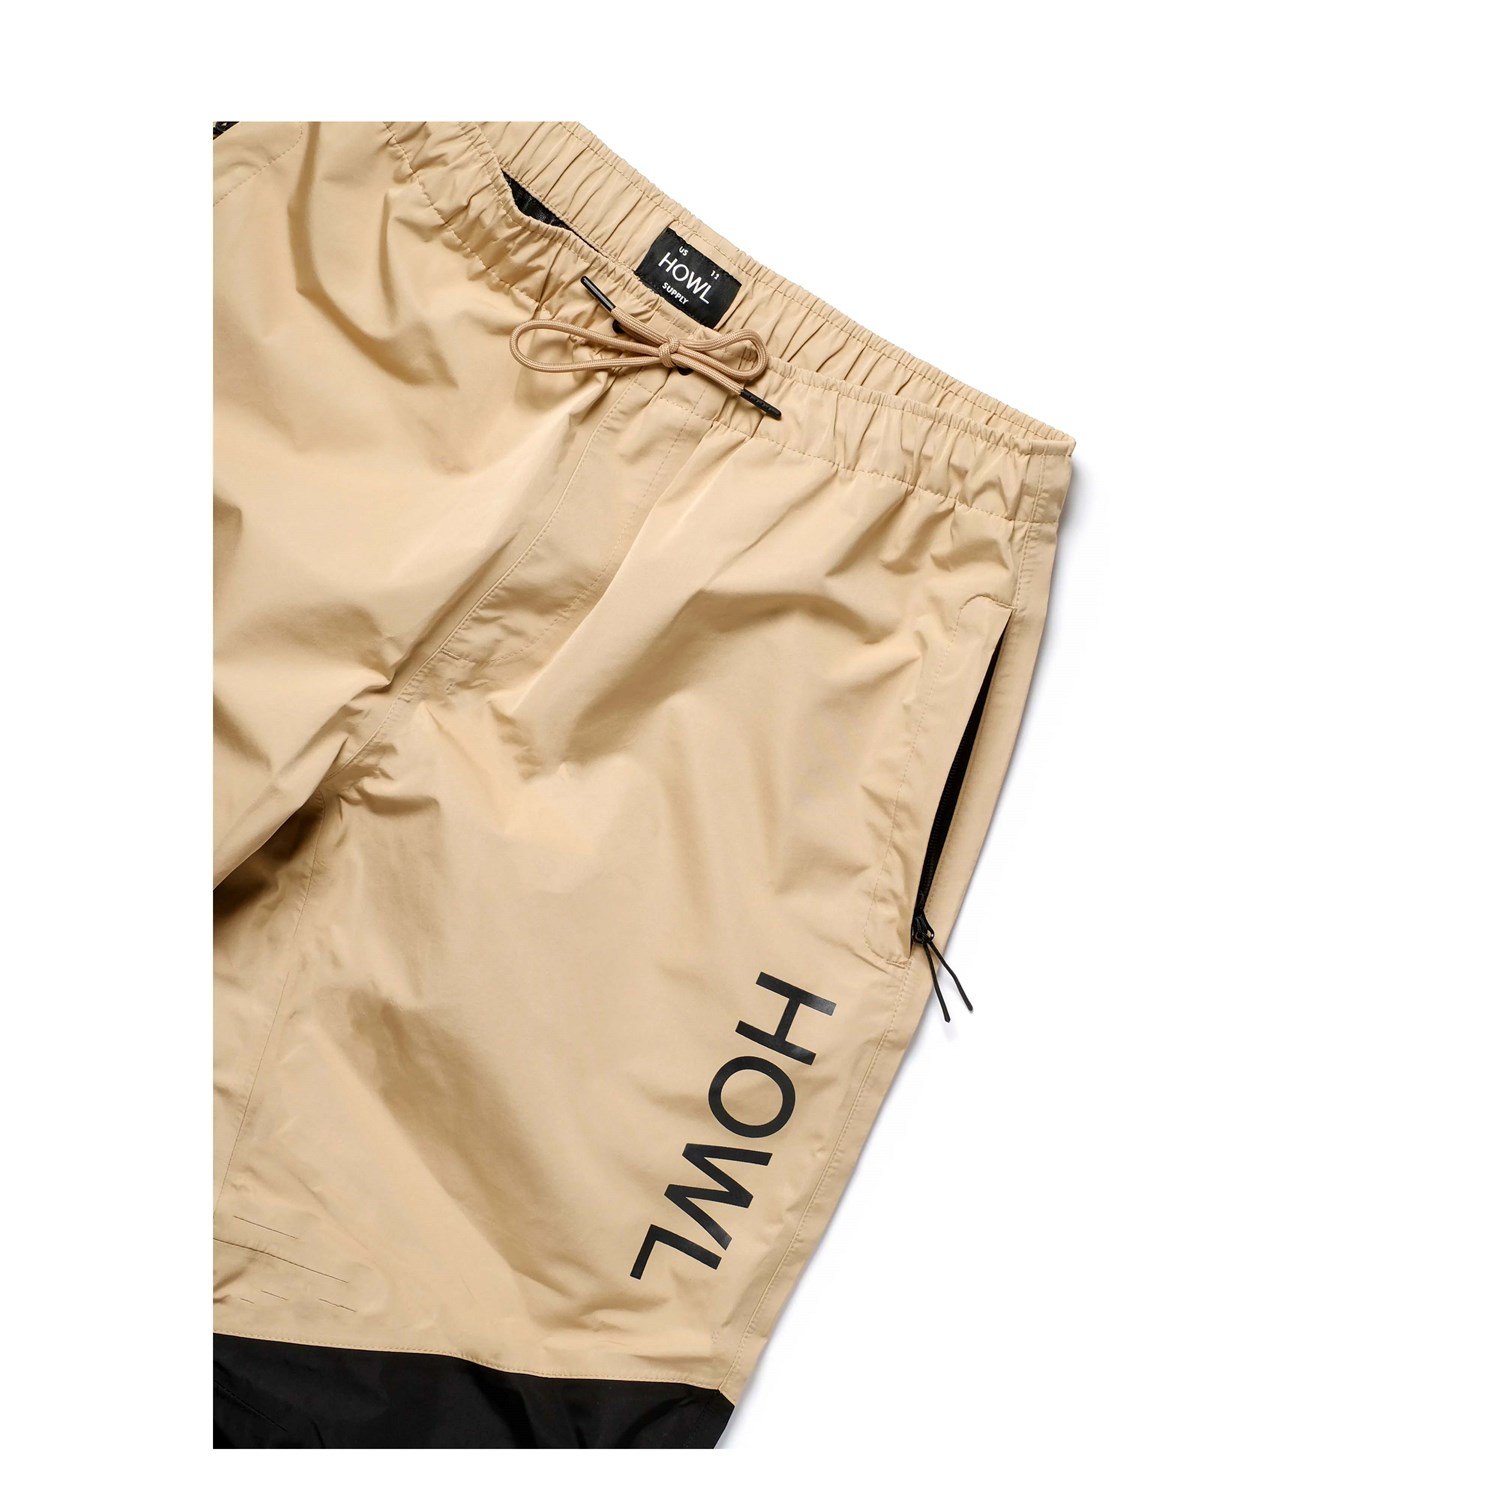 NOWHERE PANT – HOWL SUPPLY